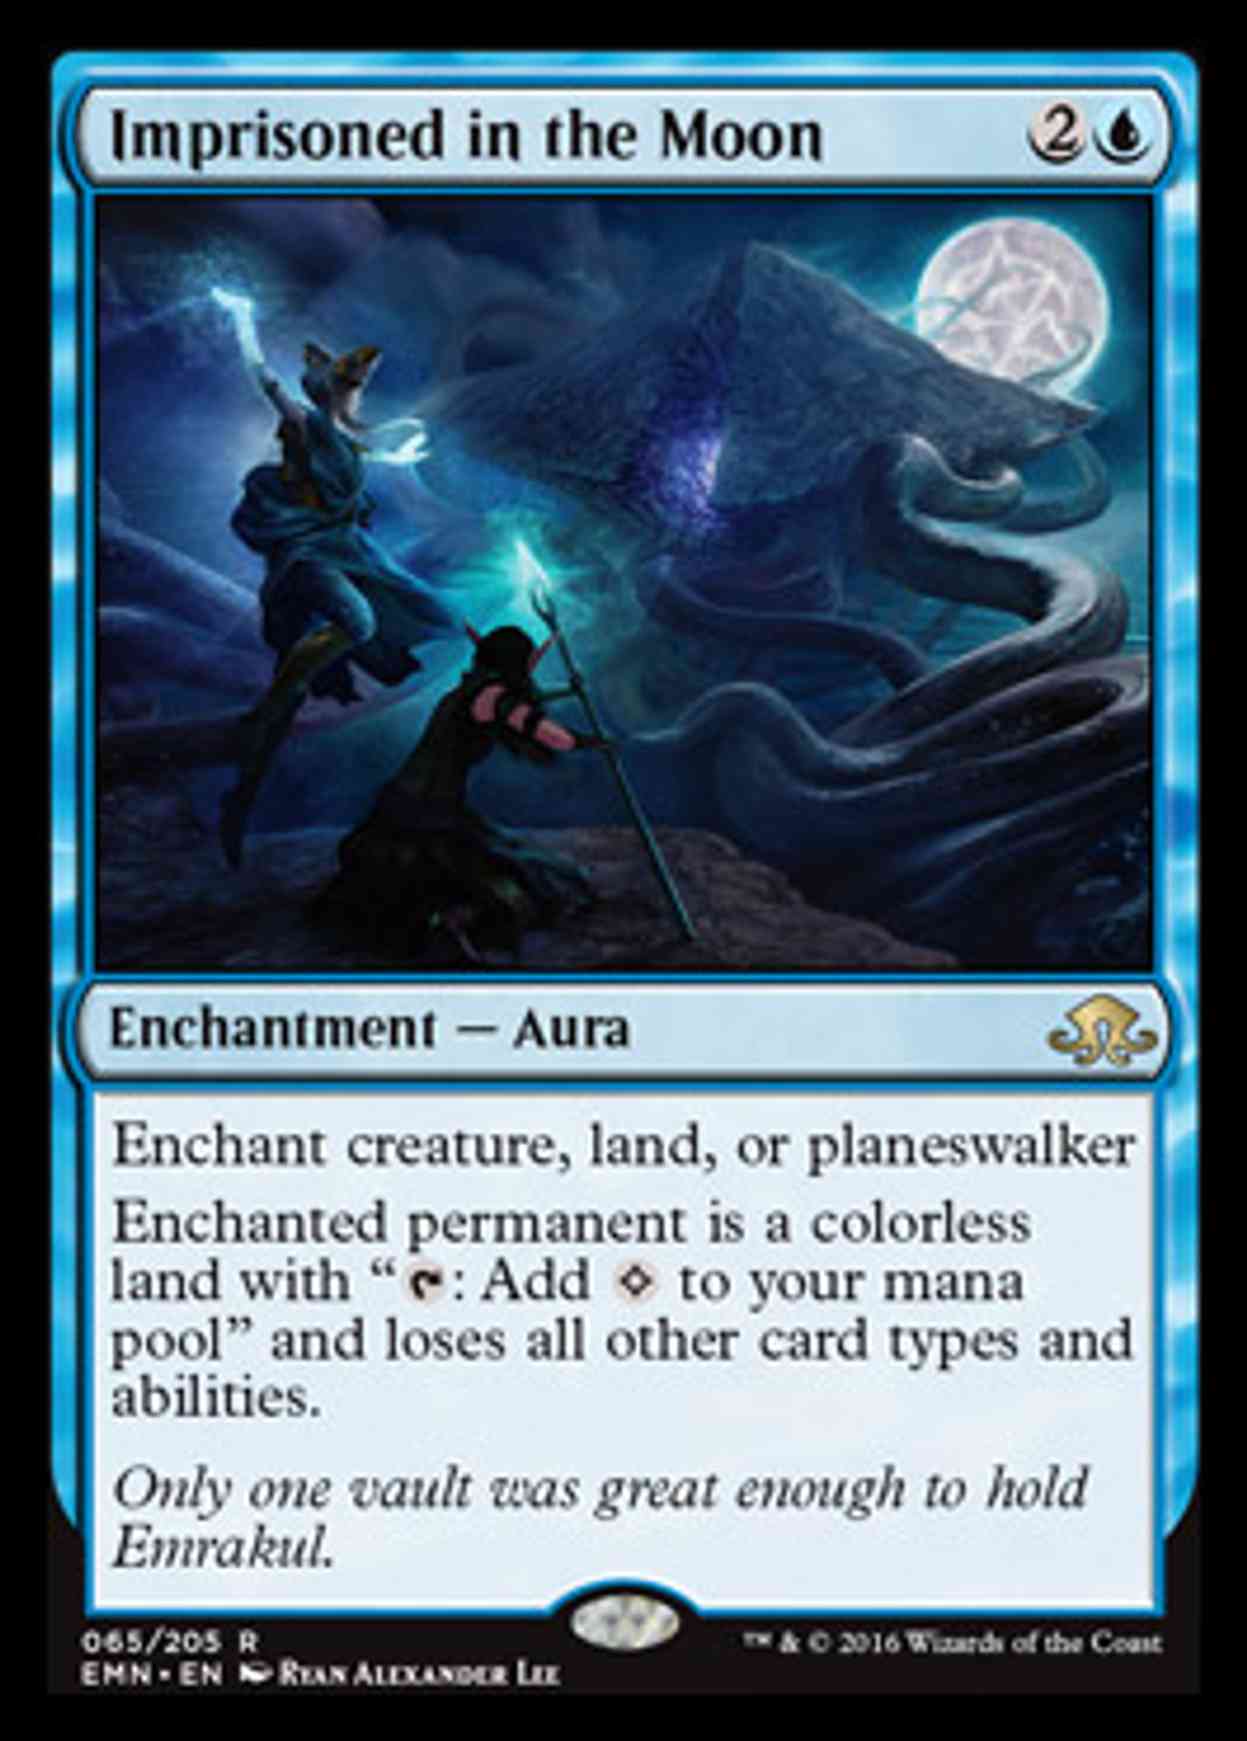 Imprisoned in the Moon magic card front